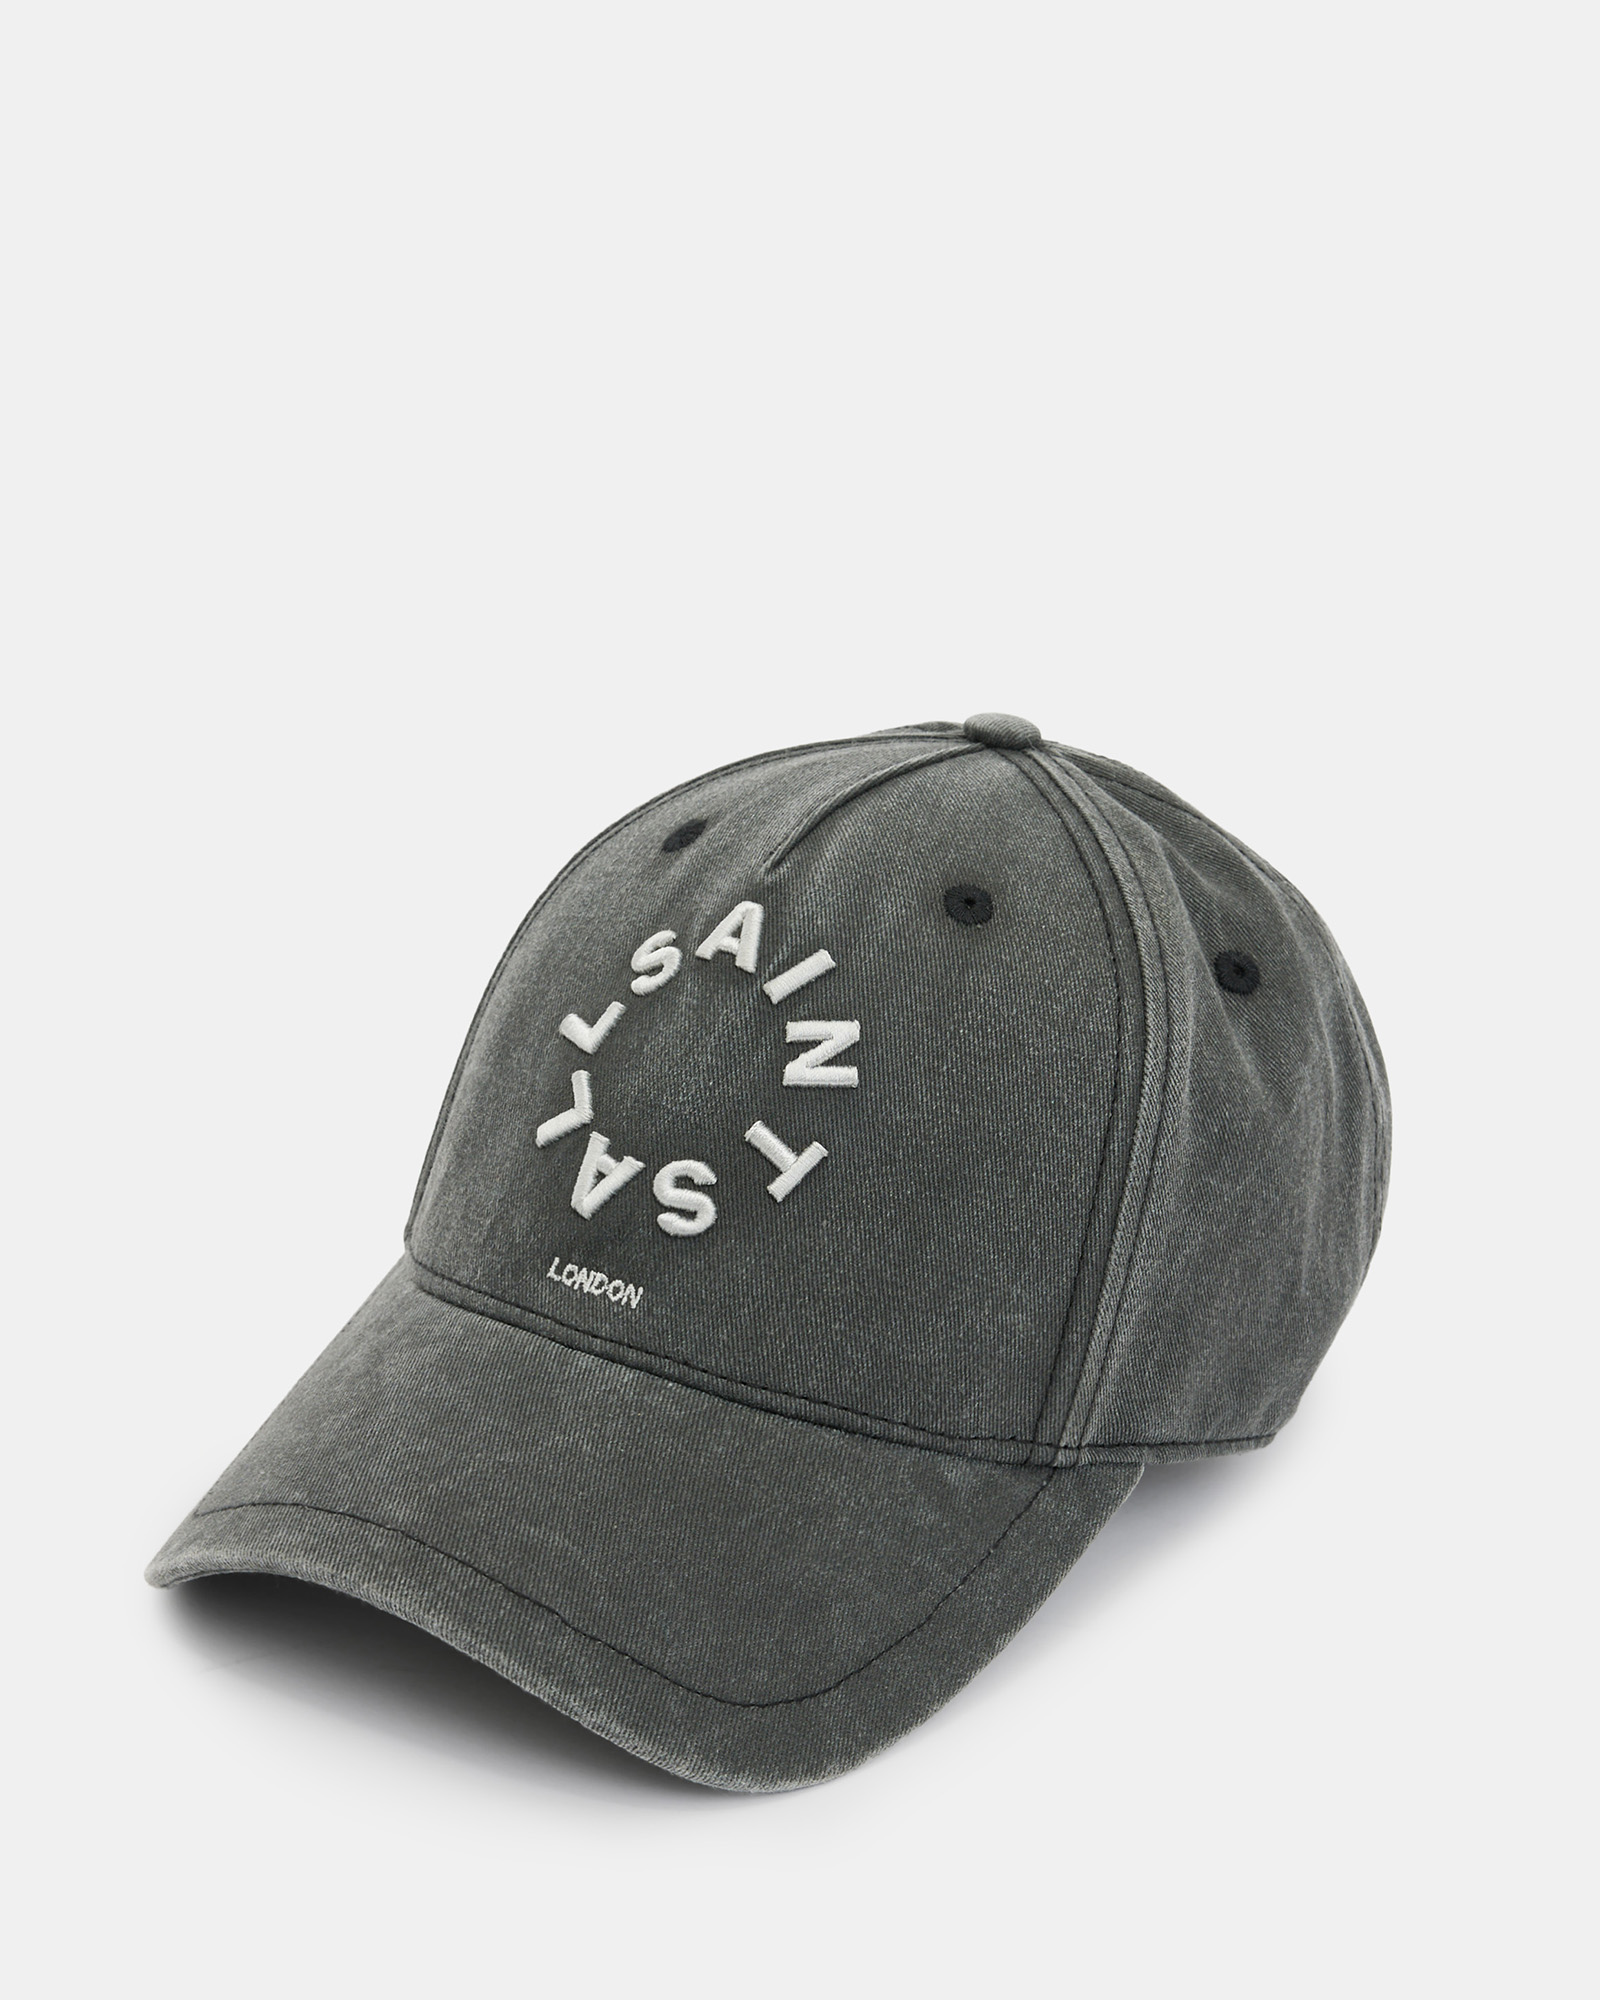 AllSaints Tierra Embroidered Logo Baseball Cap,, WASHED BLACK/WHITE